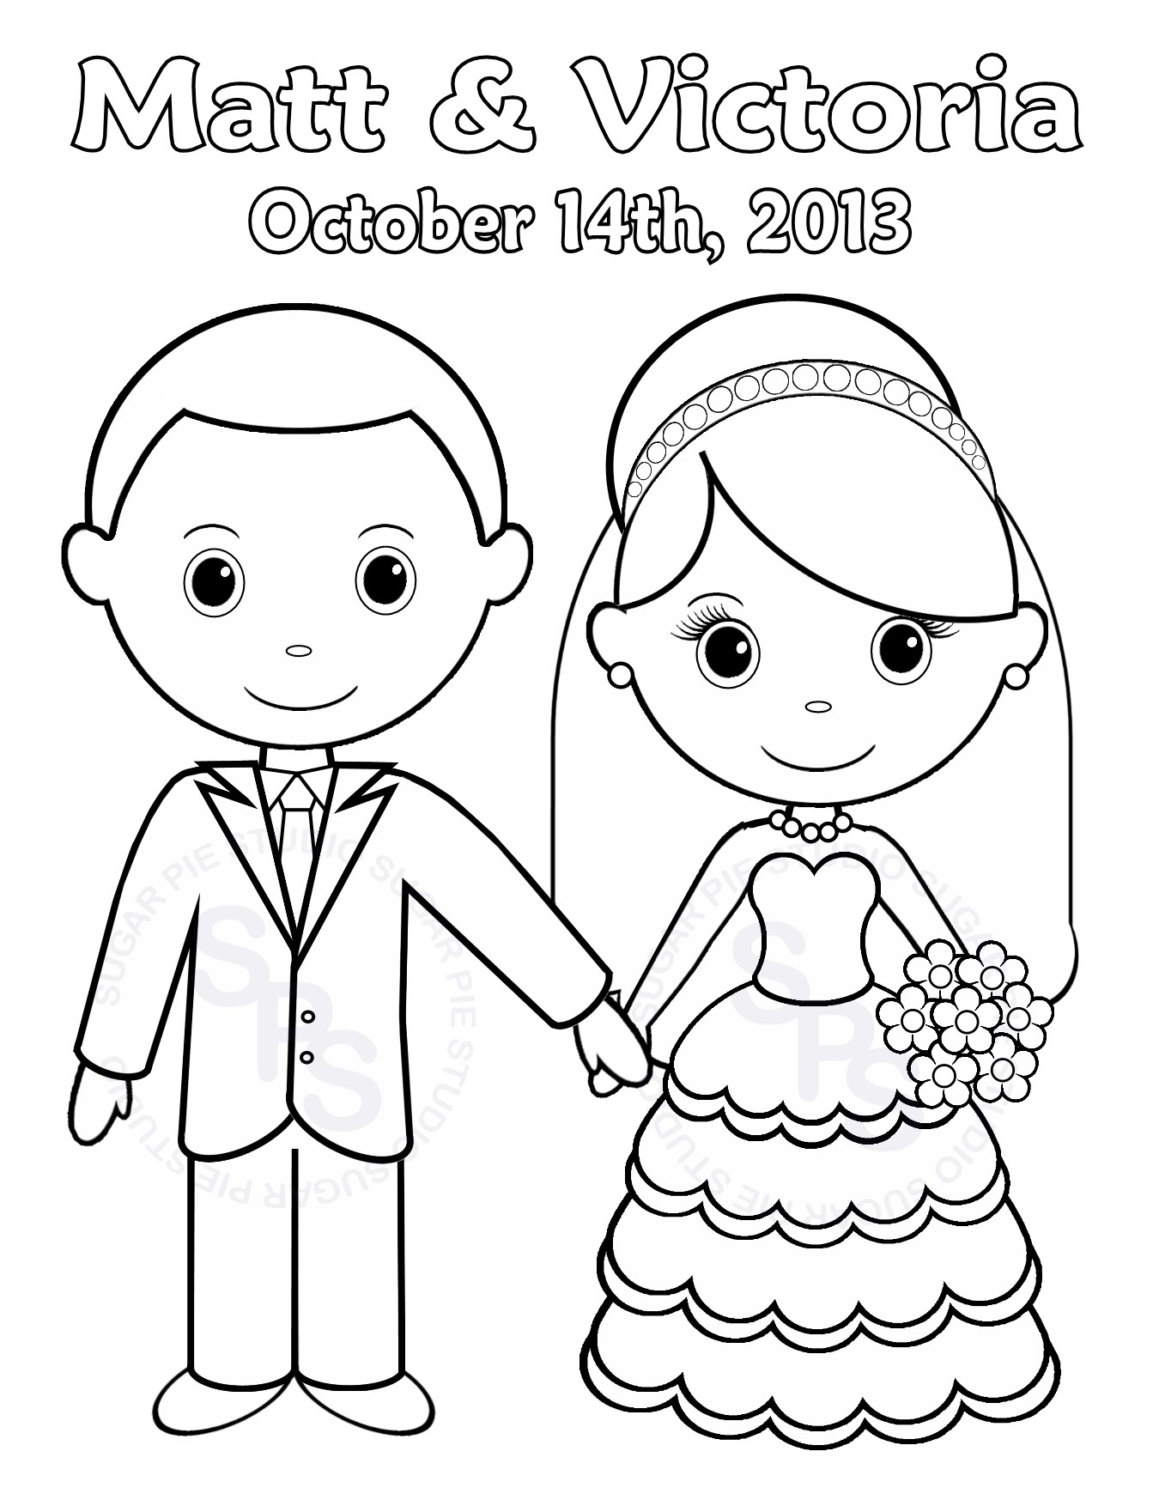 Coloring Pages : Zoloftonline Buy Info Coloring Page Weddingok Pages - Wedding Coloring Book Free Printable